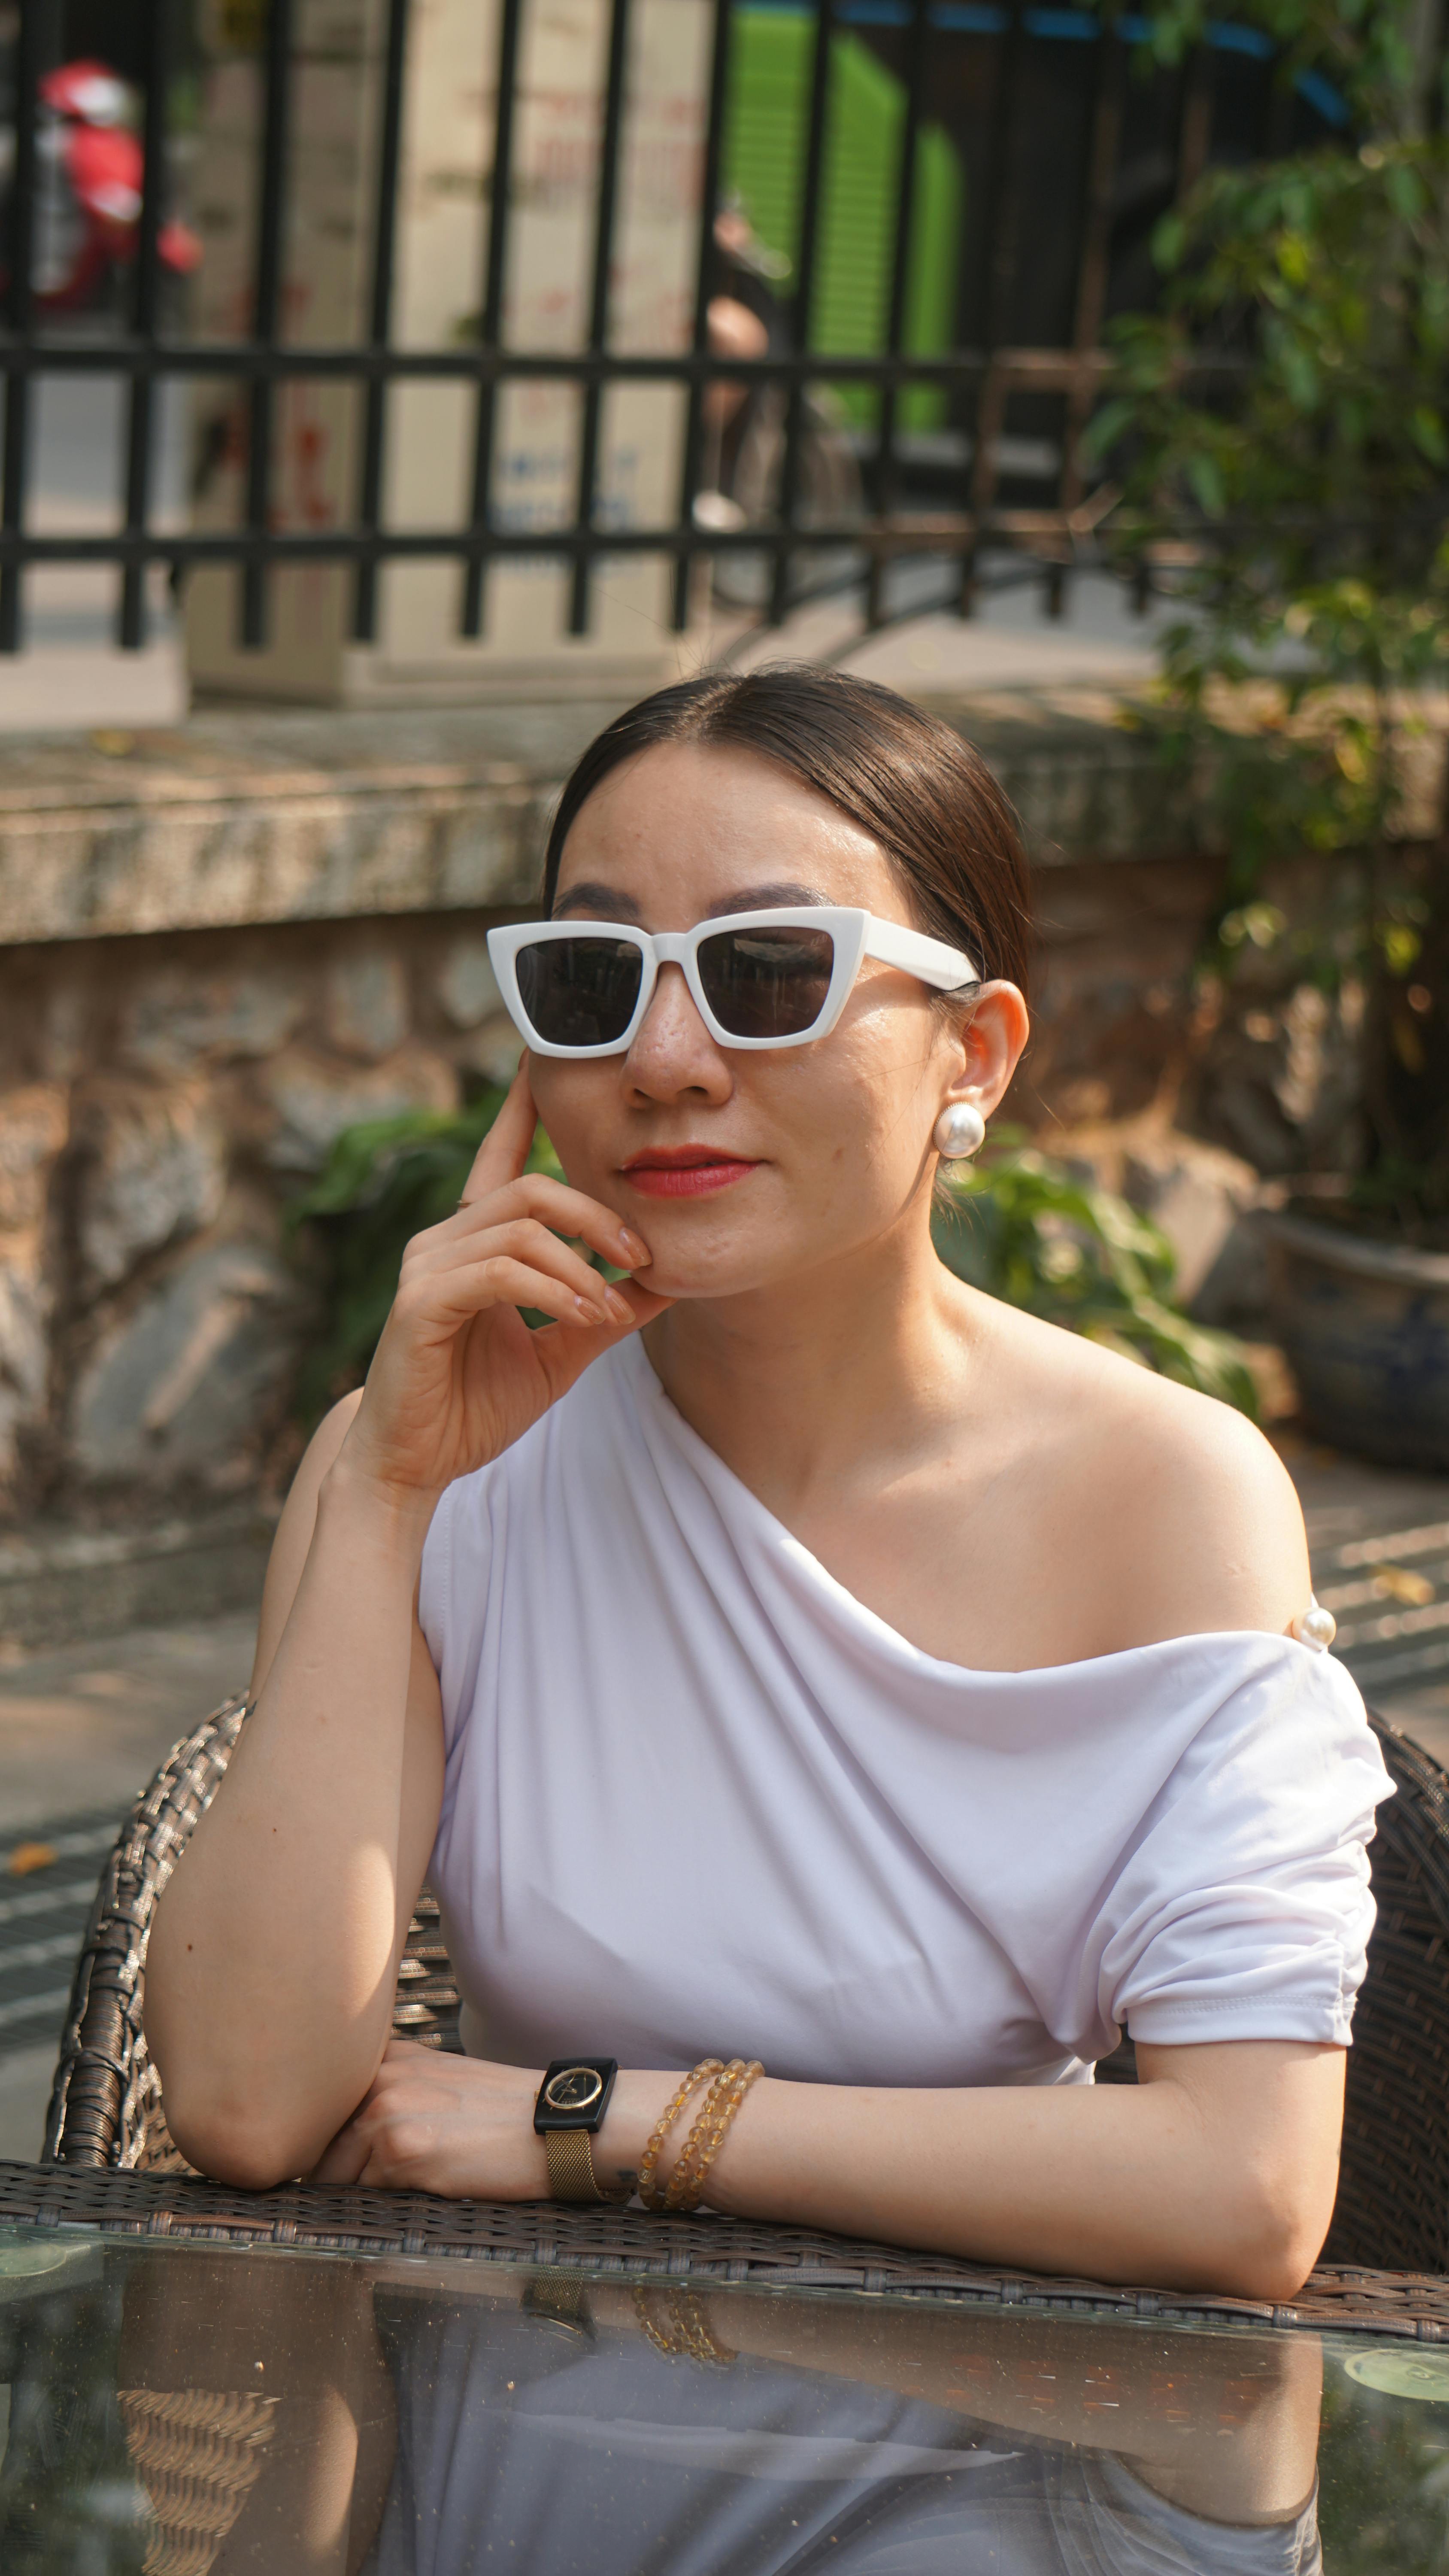 A Woman Wearing Sunglasses Sitting on Stairs · Free Stock Photo